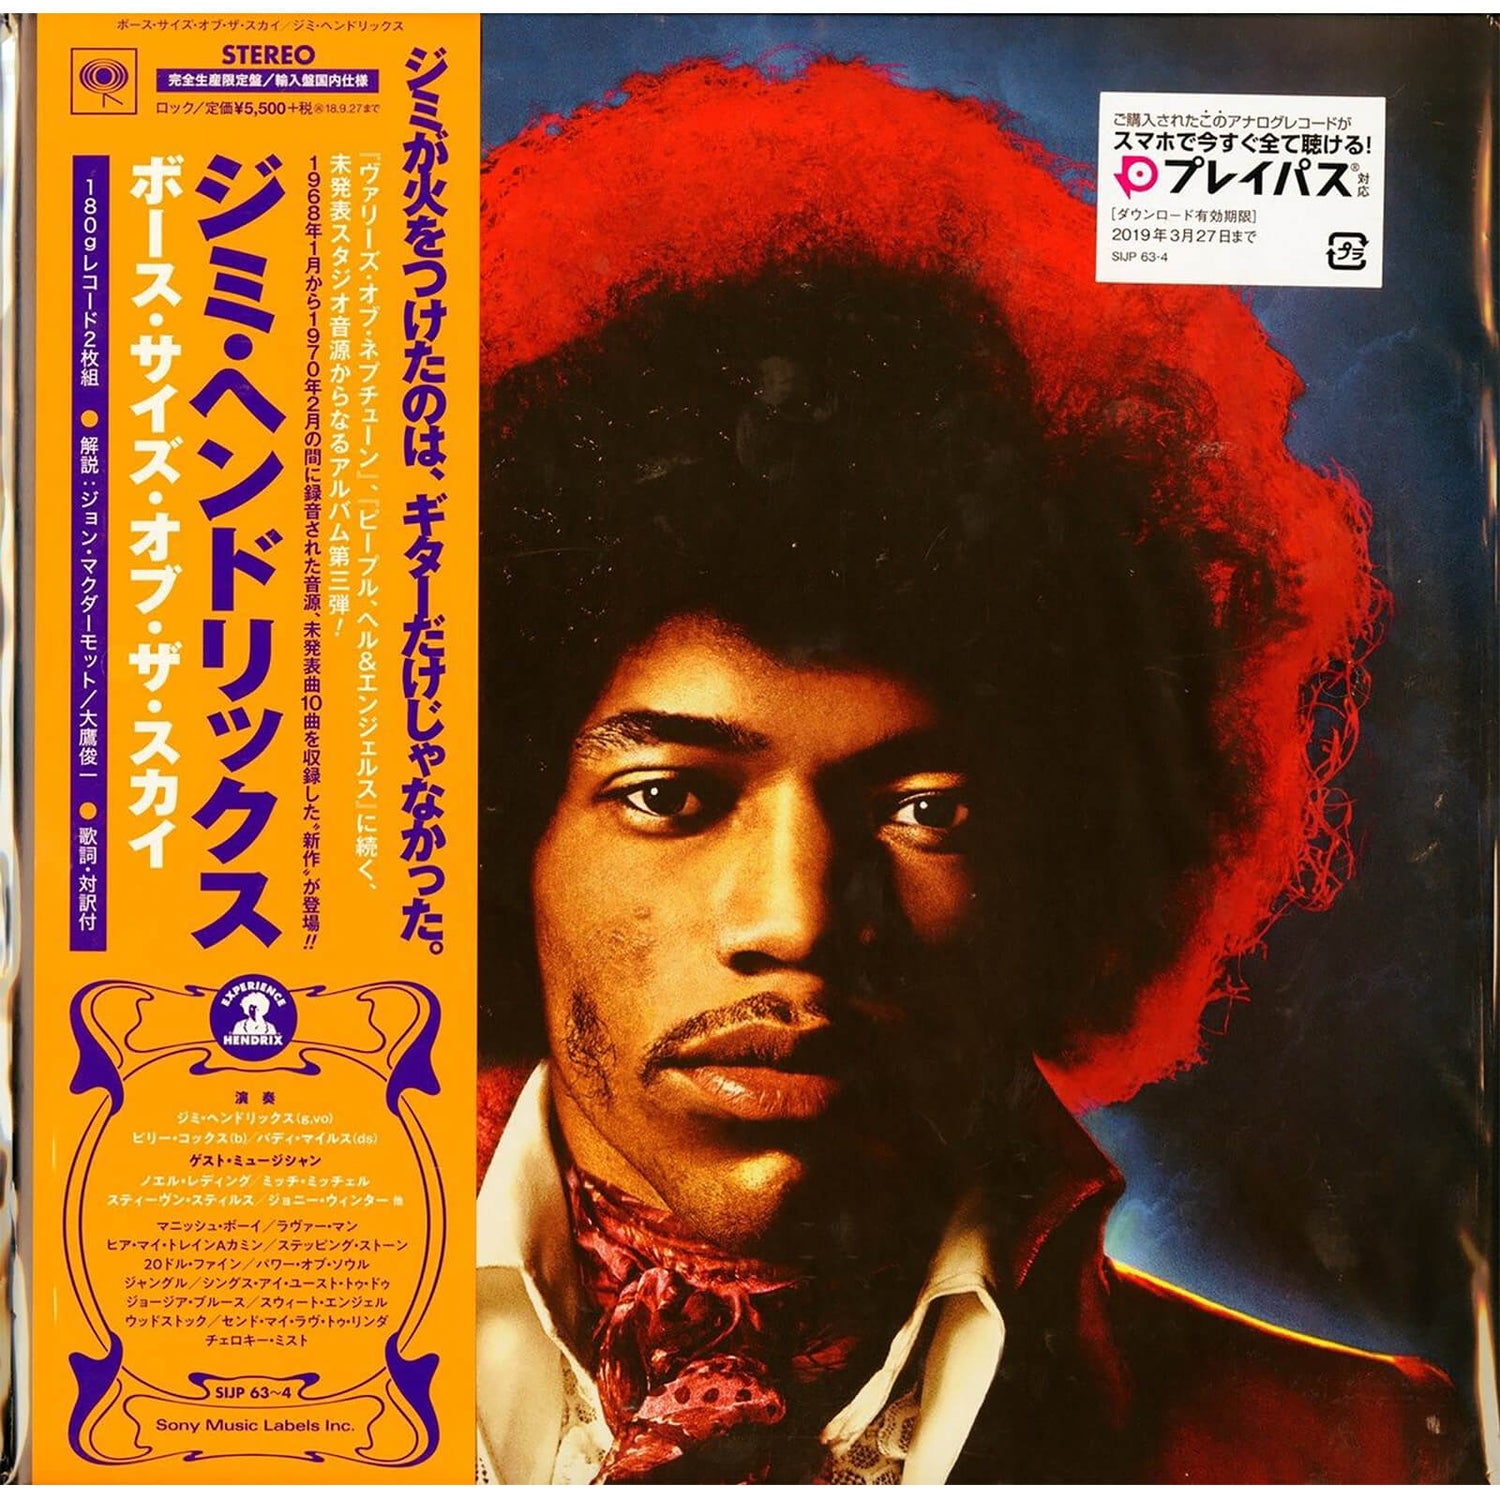 Jimi Hendrix - Both Sides Of The Sky (Limited Edition) Vinyl Japanese Edition